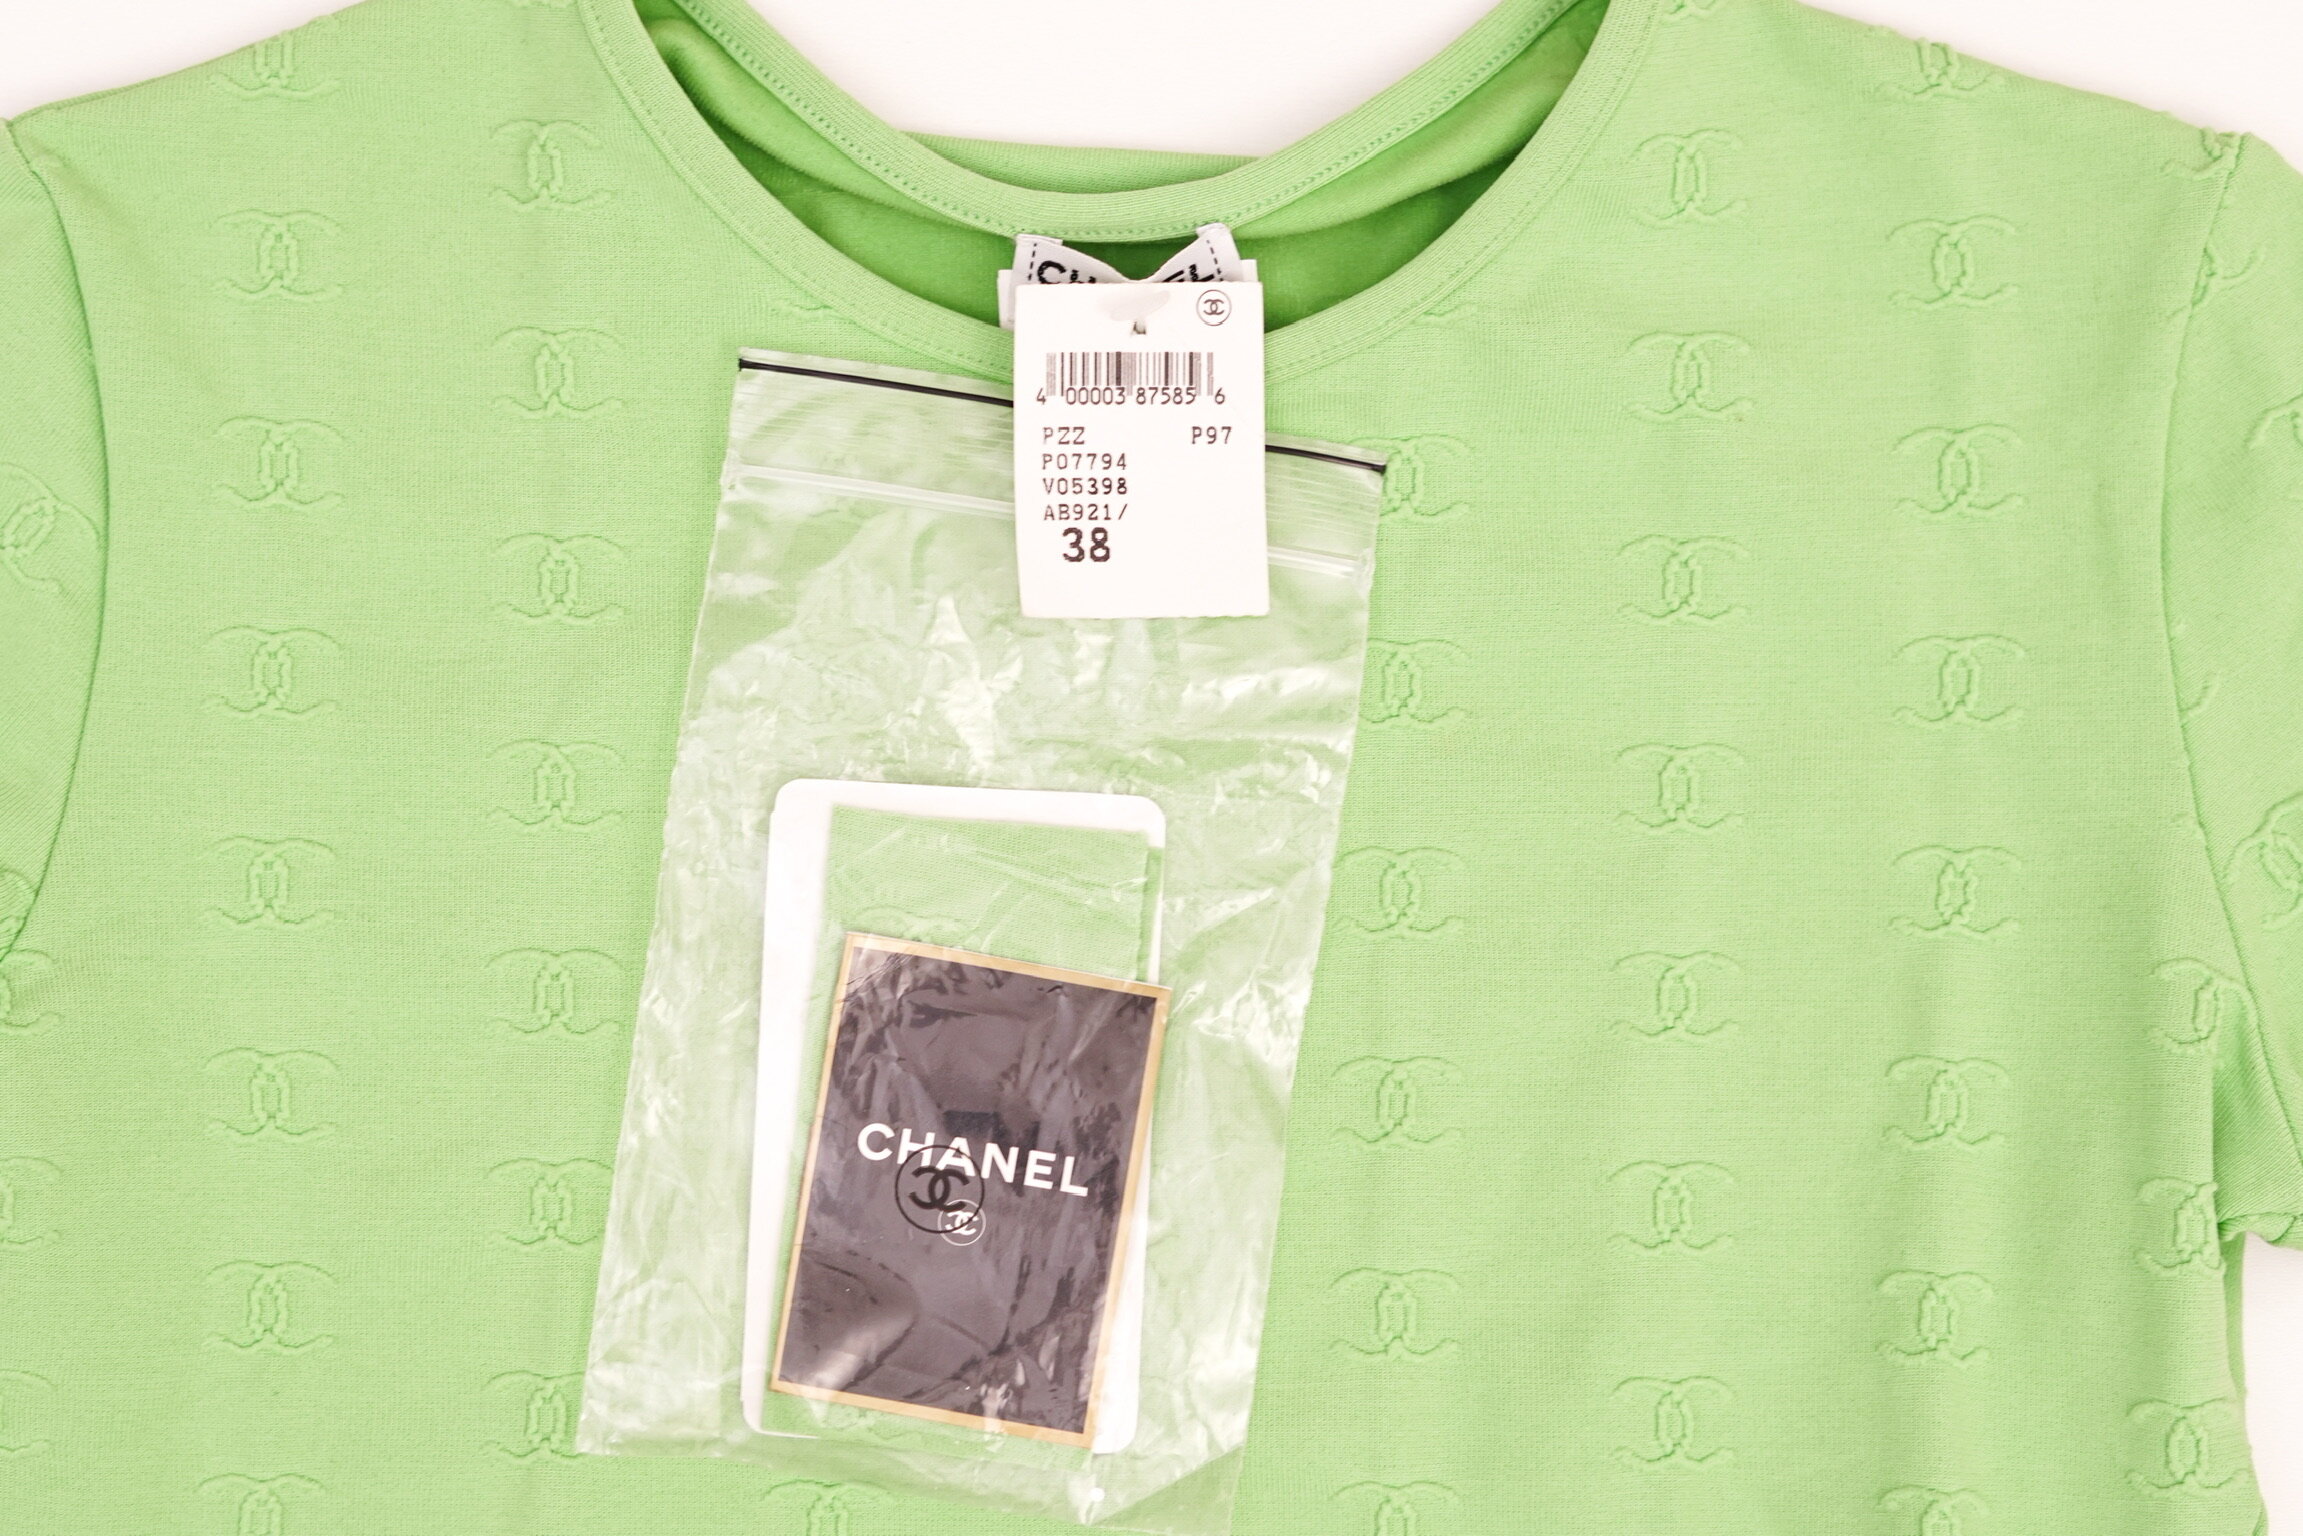 Chanel Logo Offset Printing Fabrics HXYH5378 for Shirts, Tops